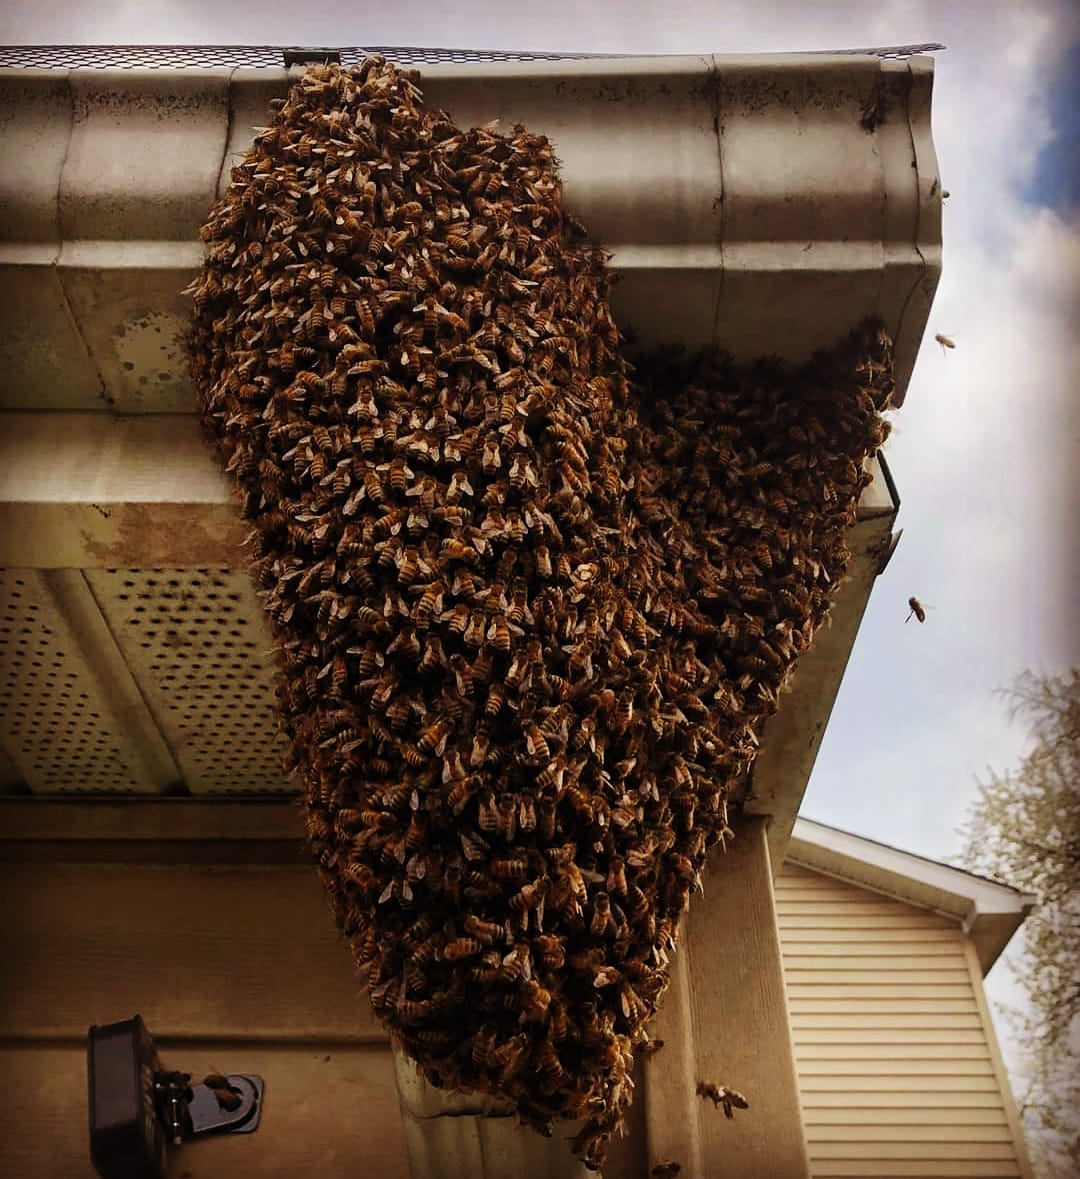 What to do if you find a Honey Bee Swarm?